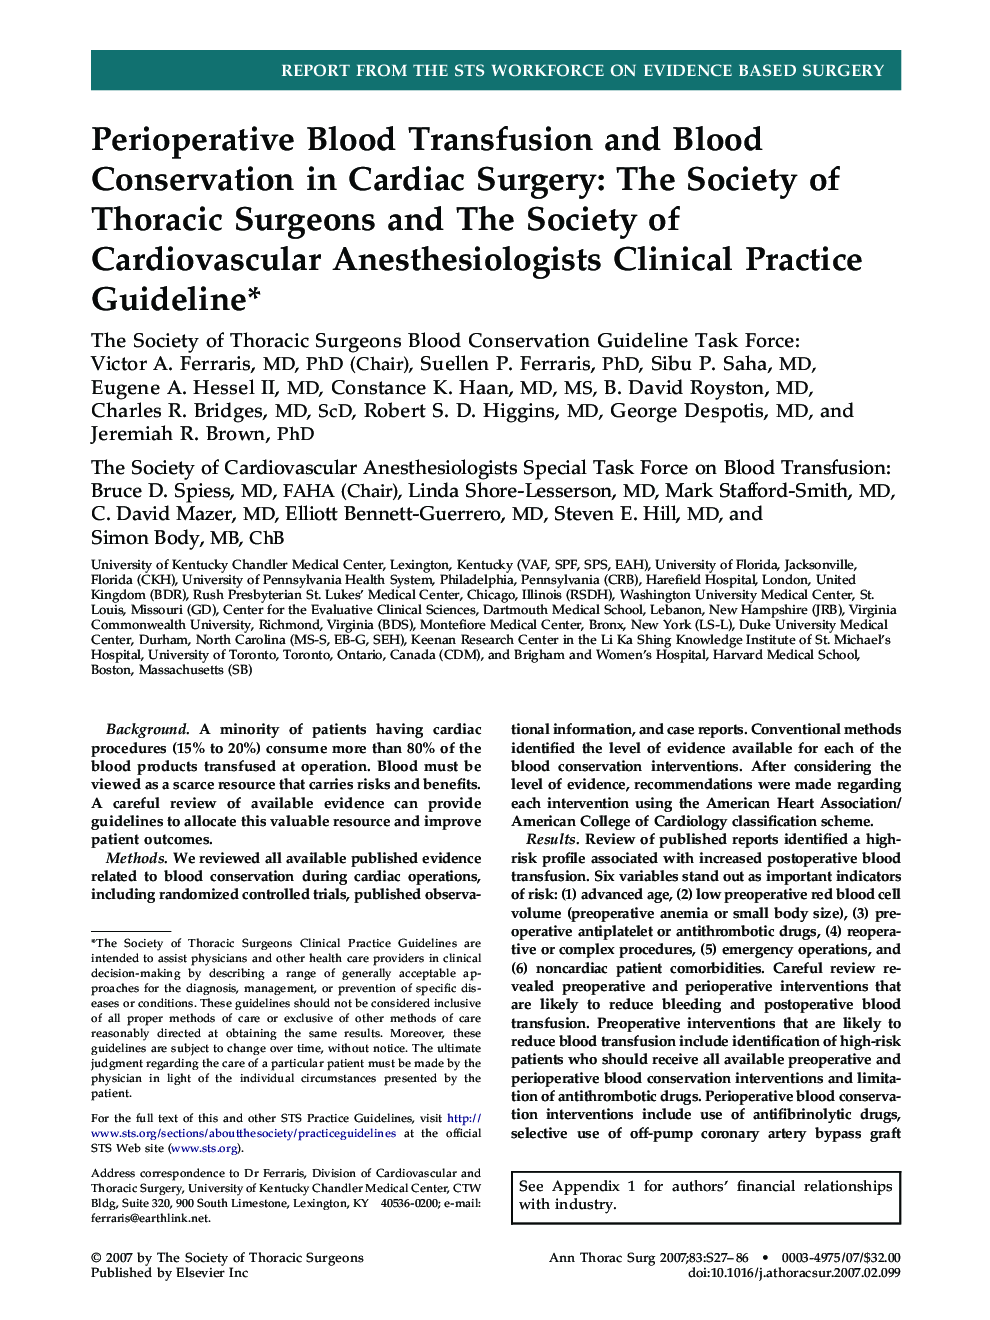 Perioperative Blood Transfusion and Blood Conservation in Cardiac Surgery: The Society of Thoracic Surgeons and The Society of Cardiovascular Anesthesiologists Clinical Practice Guideline*